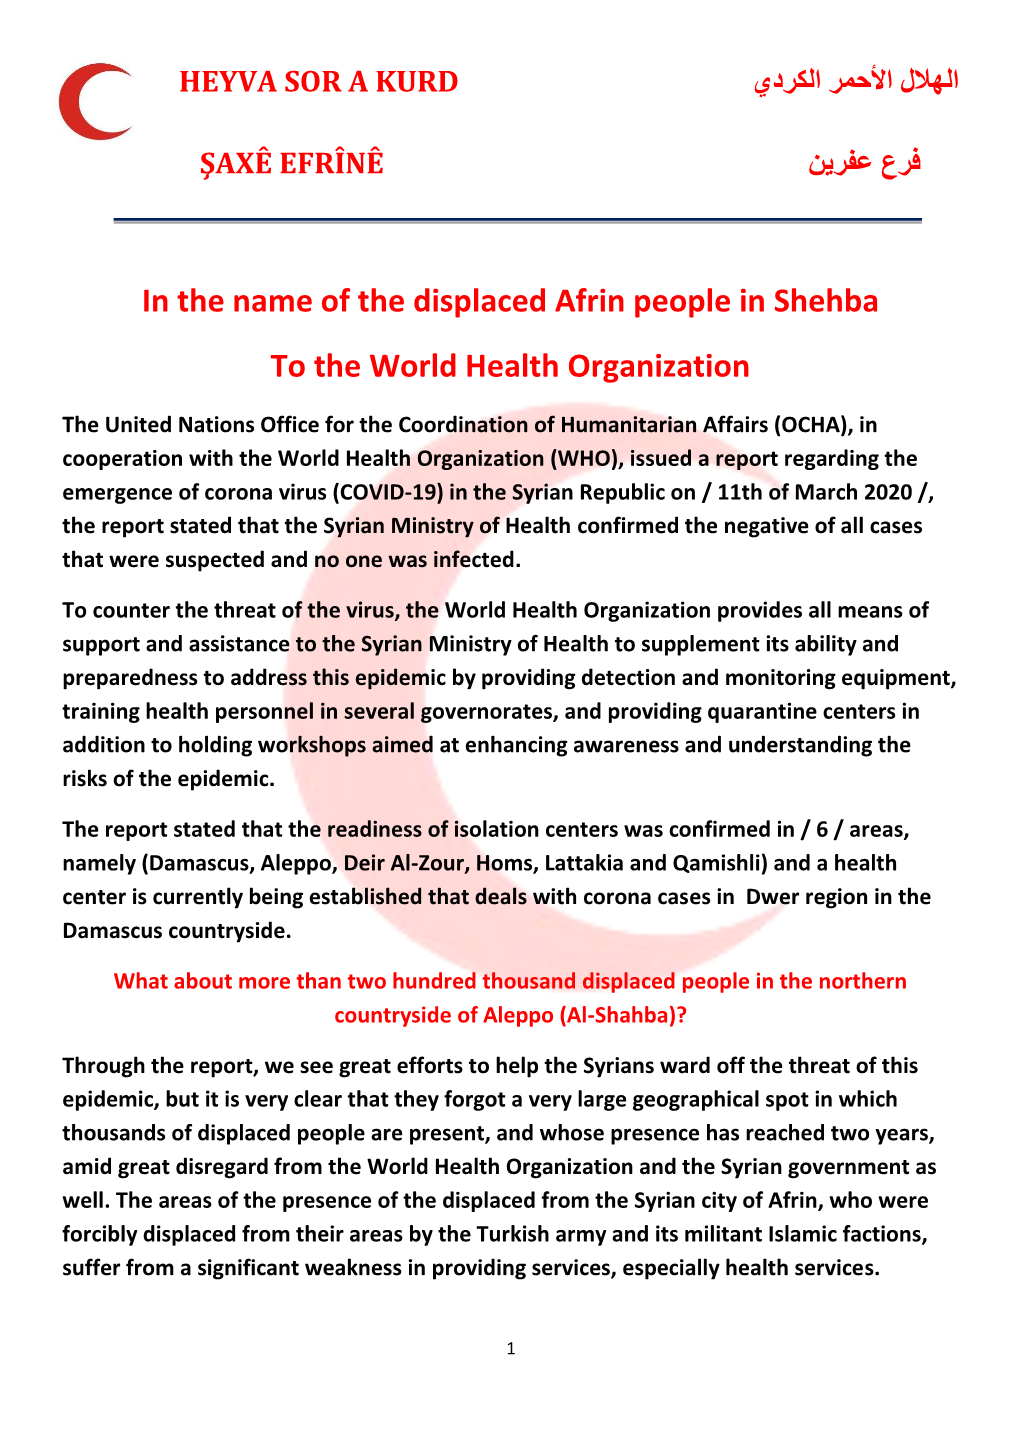 In the Name of the Displaced Afrin People in Shehba to the World Health Organization